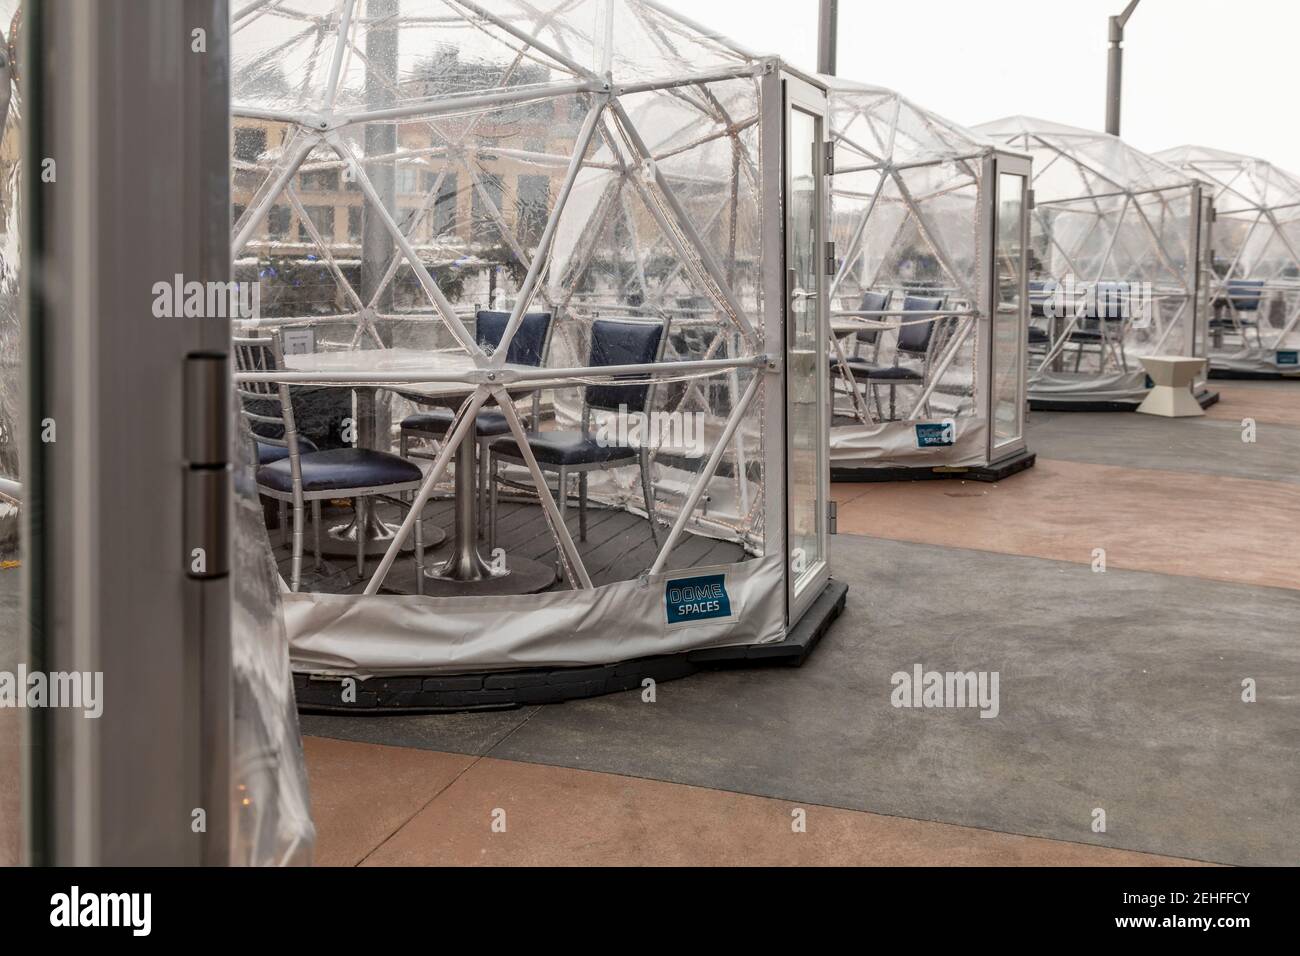 Grand Rapids, Michigan - Outdoor dining igloos at the JW Marriott Hotel during the coronavirus pandemic. Stock Photo